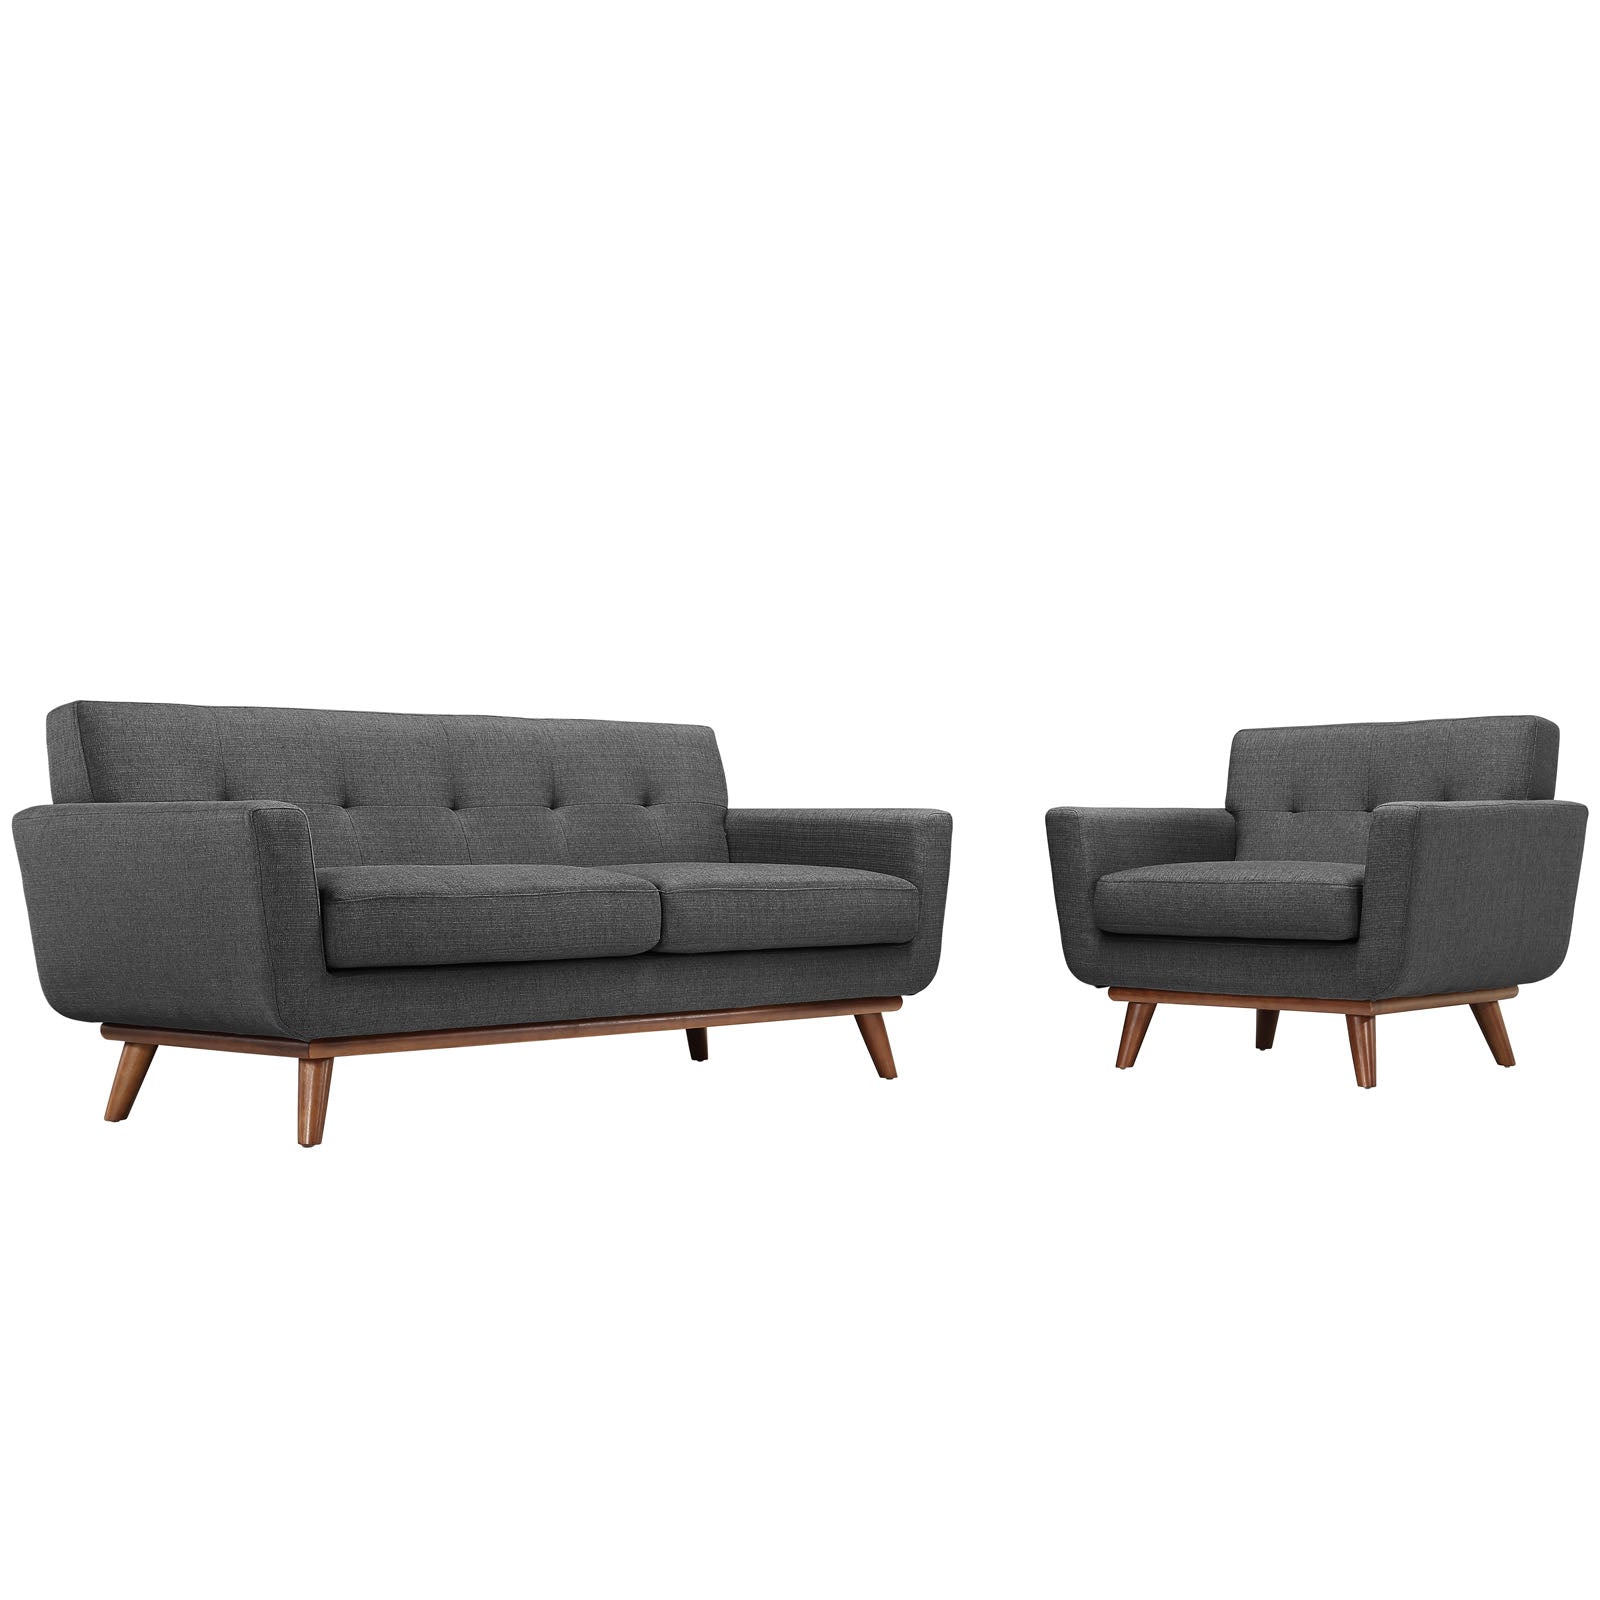 Engage Armchair and Loveseat Set of 2 - East Shore Modern Home Furnishings